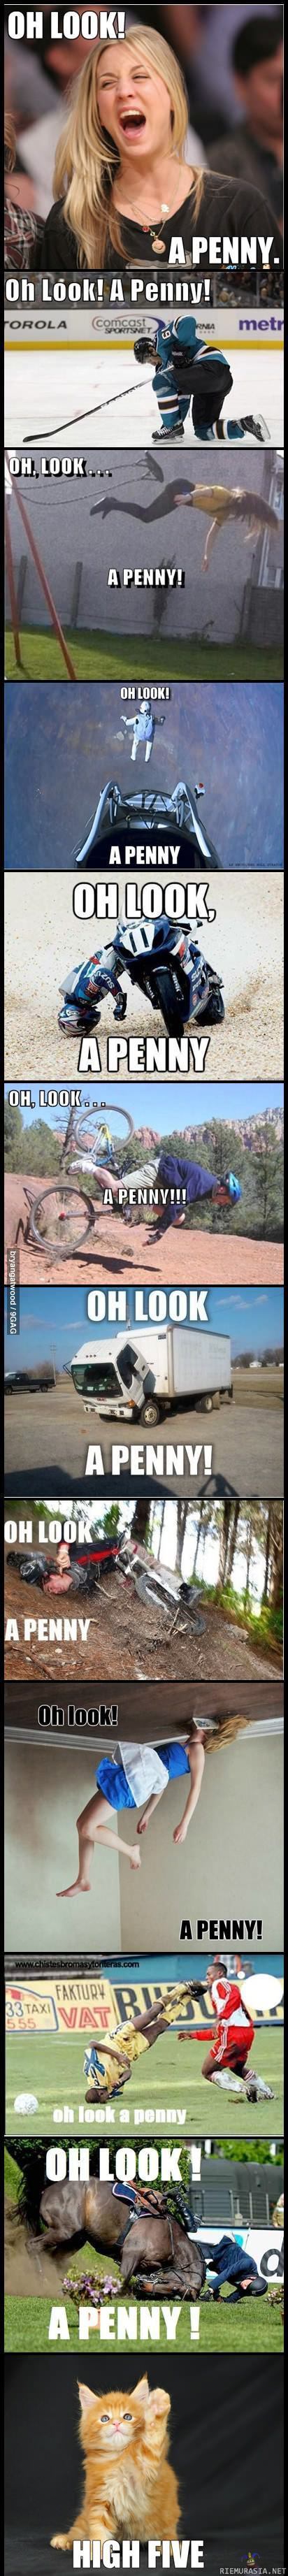 Oh look! A penny!